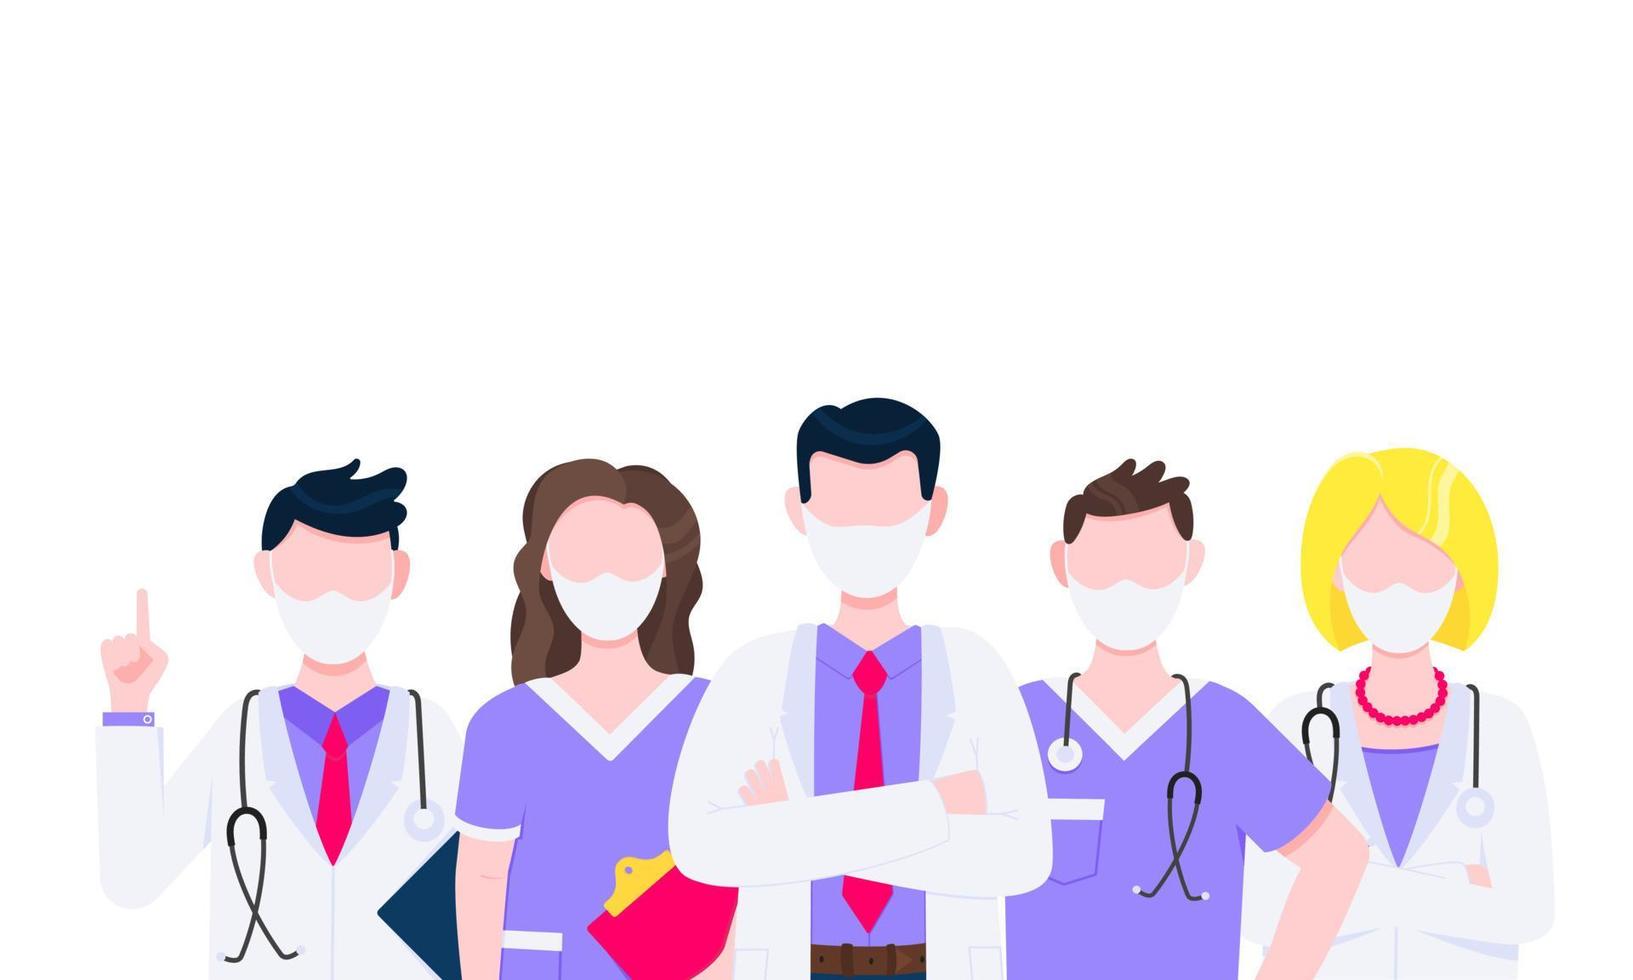 Successful team of medical employee doctors with face masks vector illustration